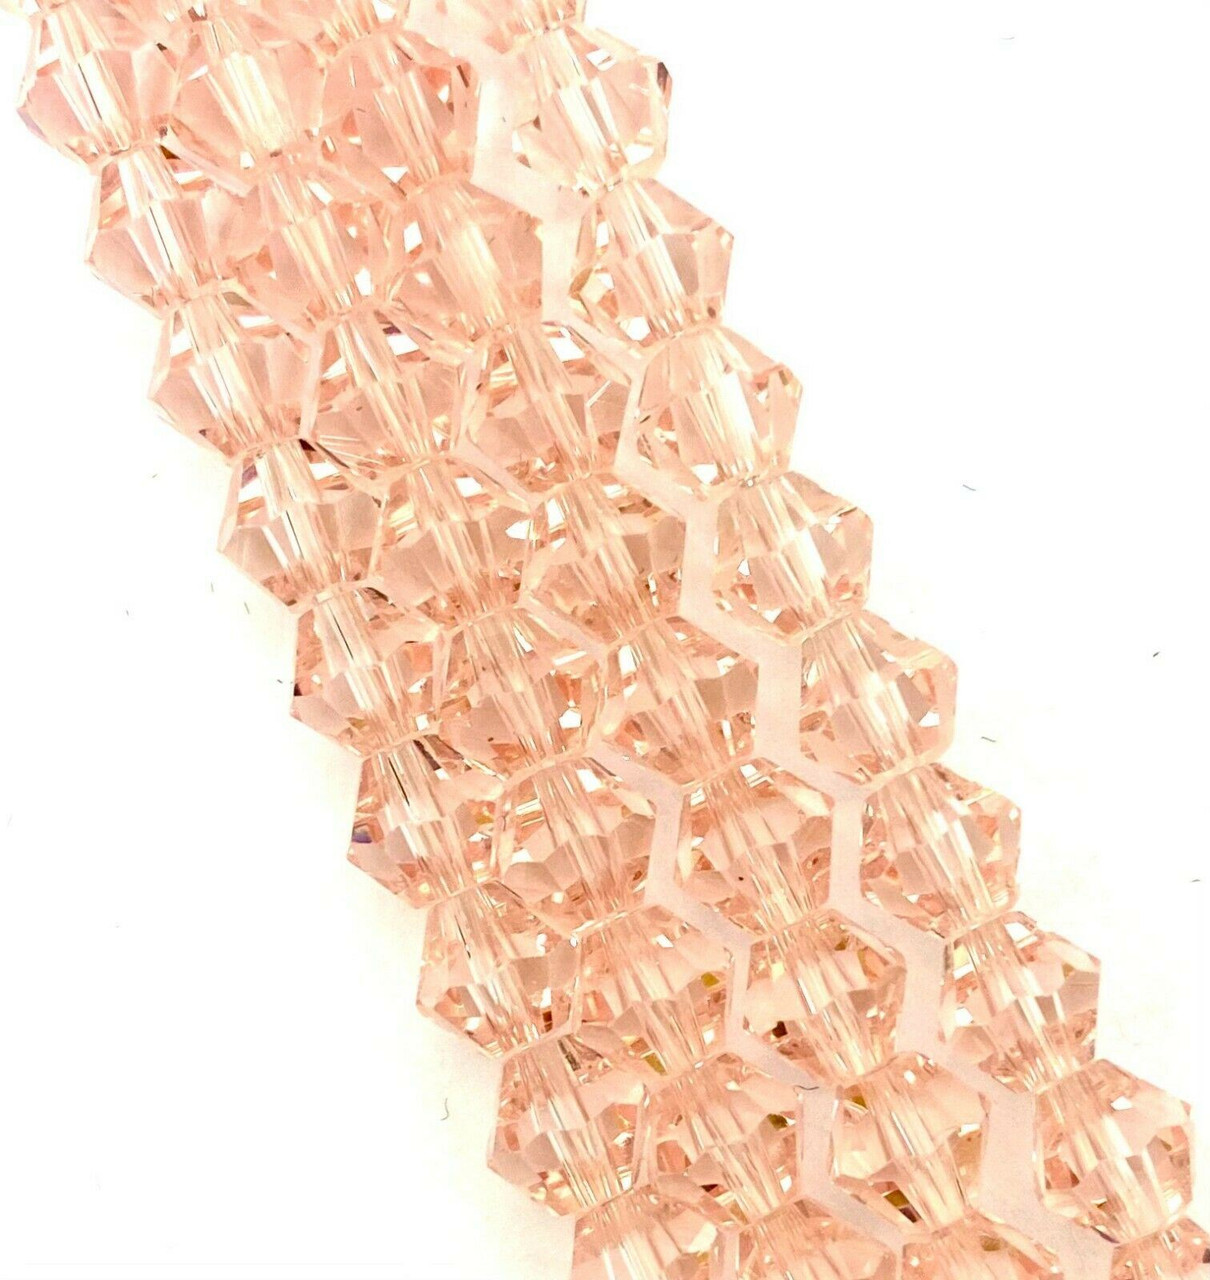 6mm Glass Bicone beads - PALE PINK - approx 12" strand (50-55 beads)